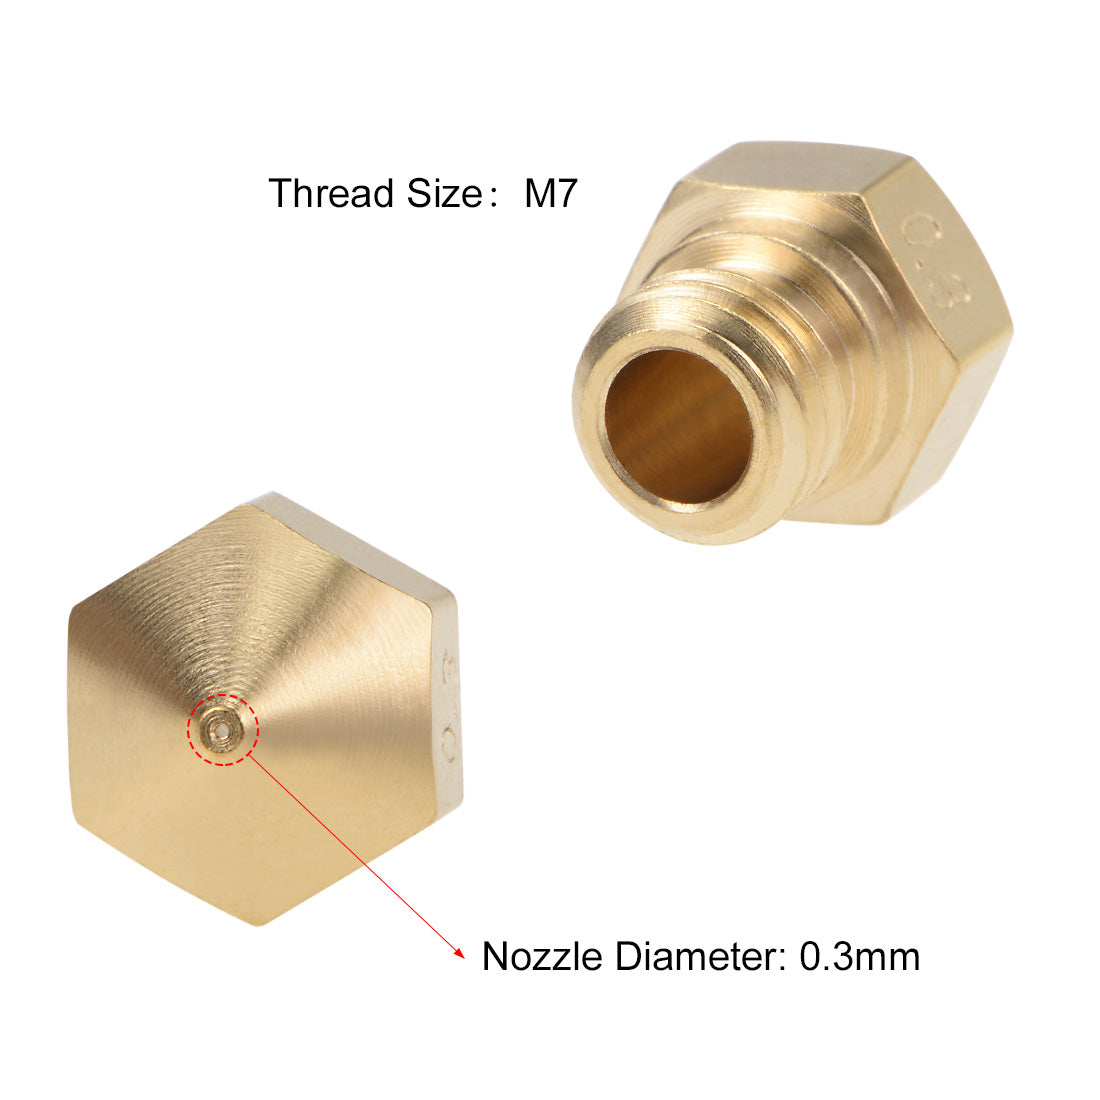 uxcell Uxcell 0.3mm 3D Printer Nozzle Head M7 for MK10 Extruder Print, Brass 5pcs